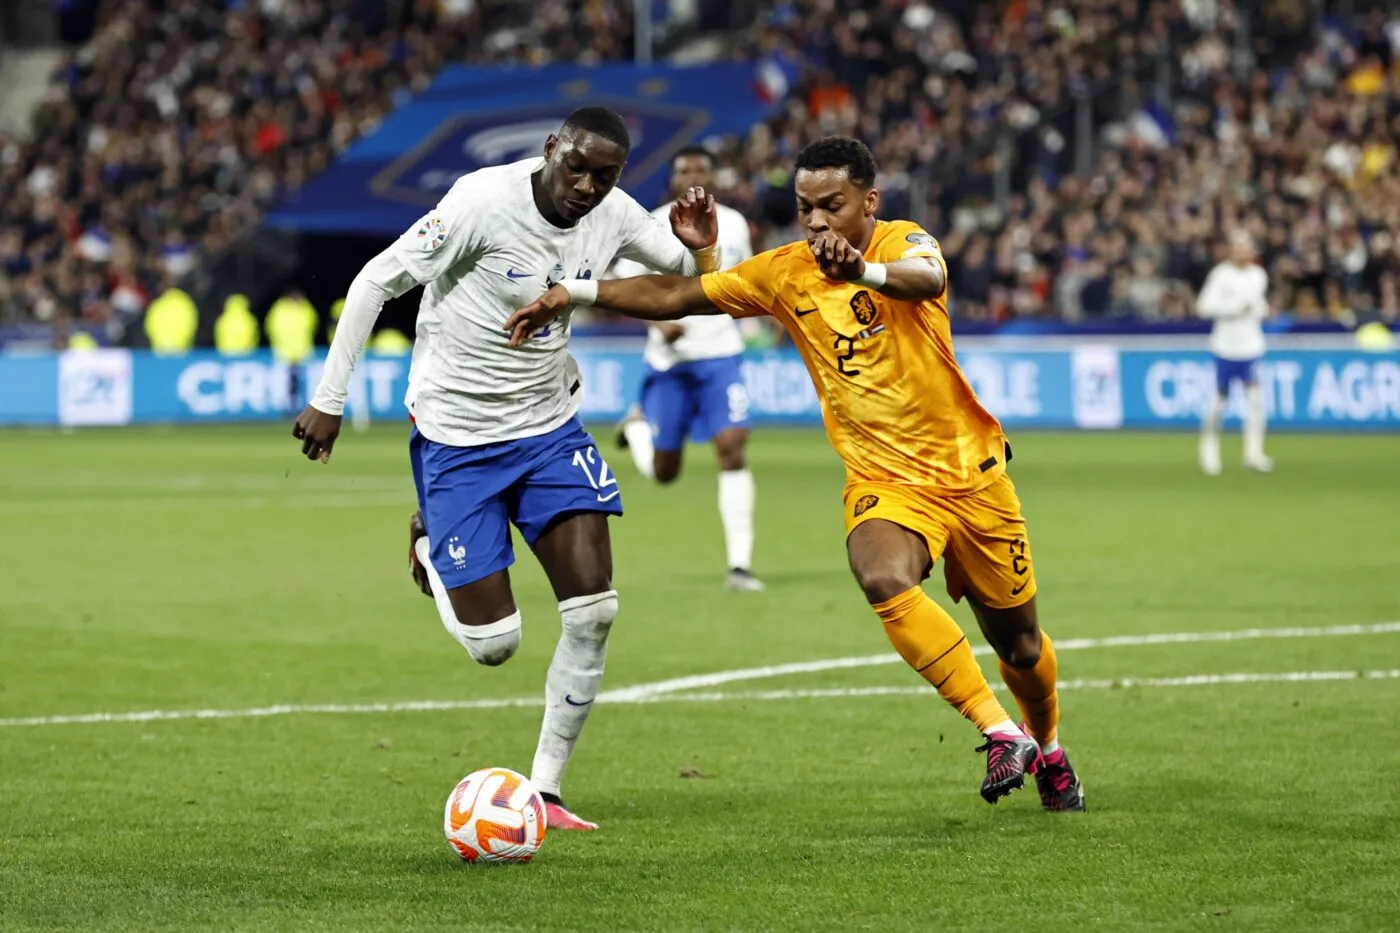 SAINT-DENIS - (lr) Randal Kolo Muani of France, Jurrien Timber of Holland during the UEFA EURO 2024 qualifying match between France and Netherlands at Stade de France on March 24, 2023 in Saint-Denis, France. ANP MAURICE VAN STONE - Photo by Icon sport